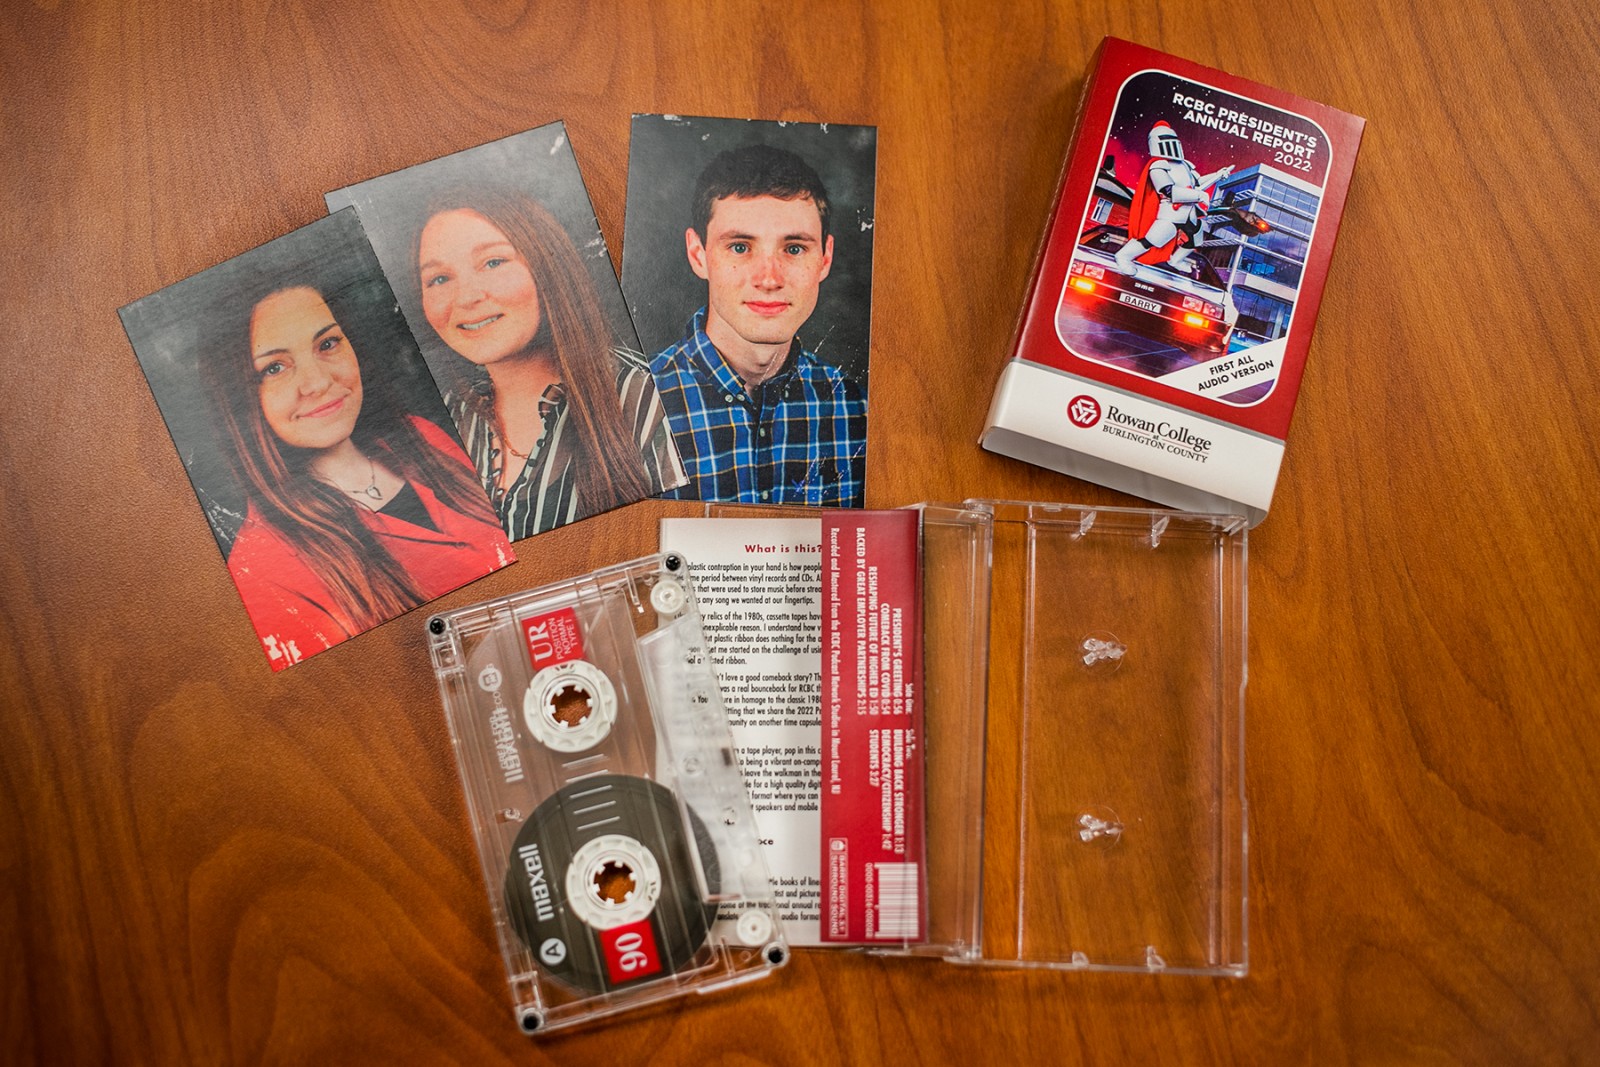 Image of the tape, and insert cards of three student graduates.